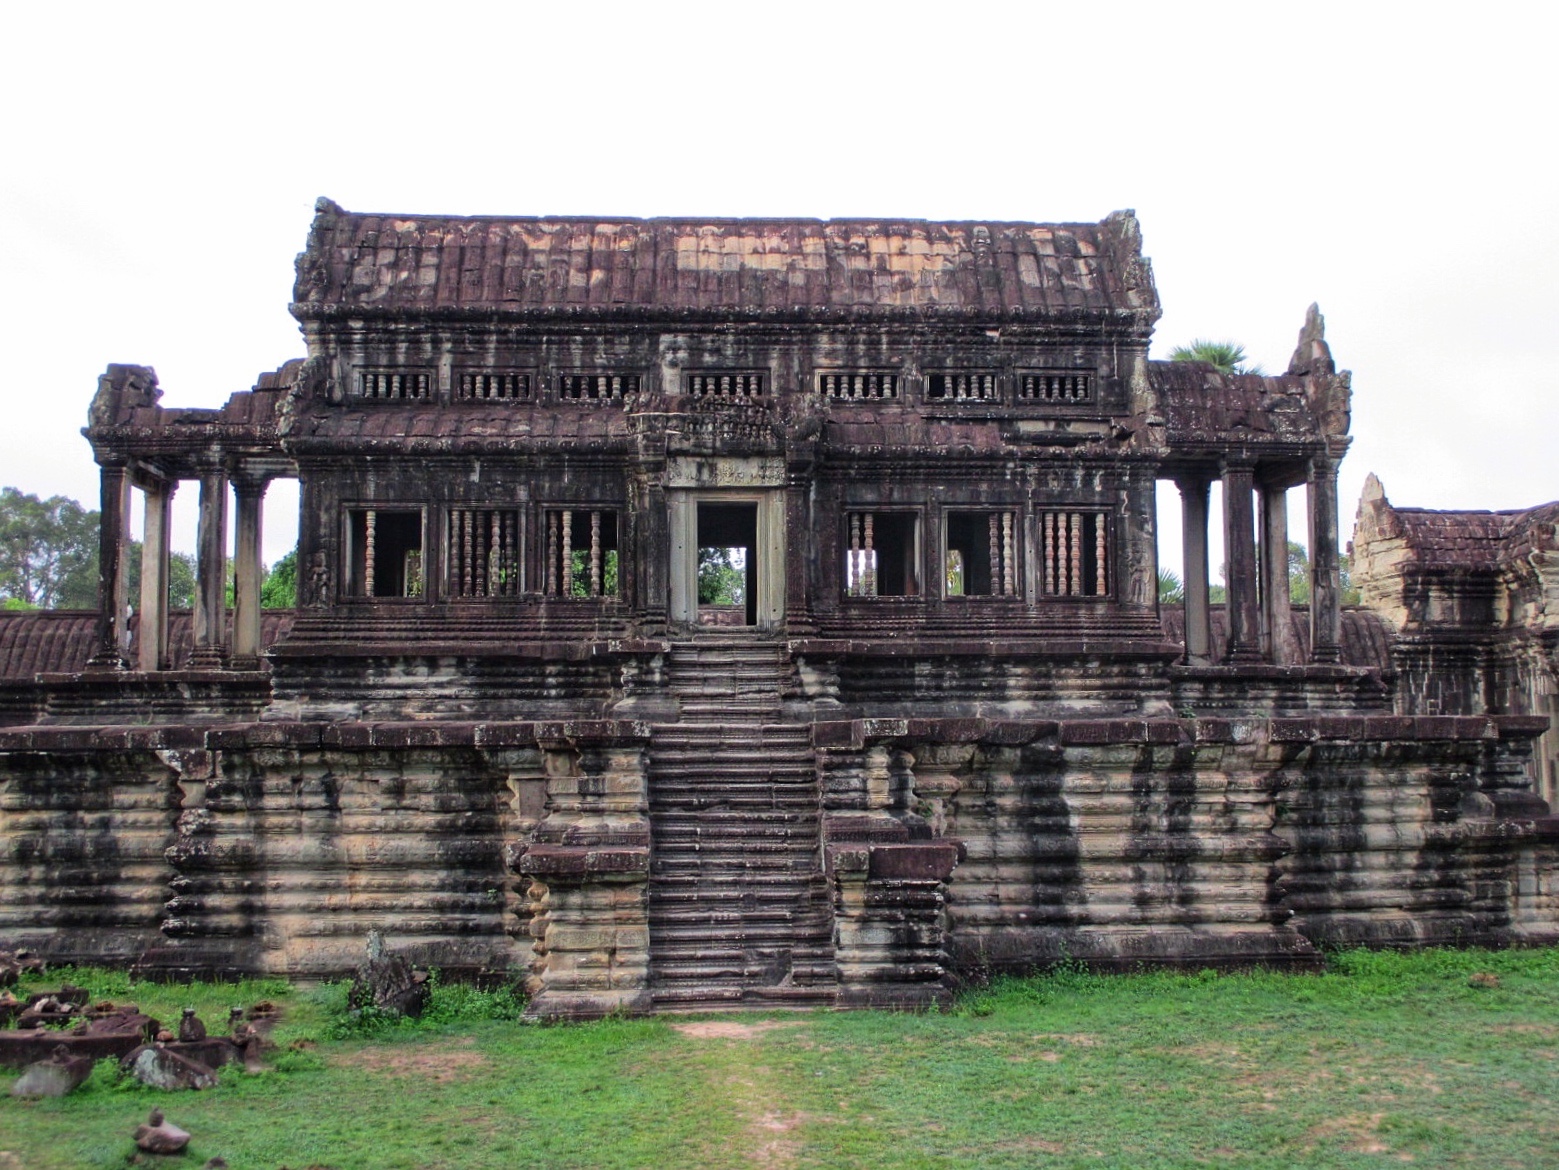 Northern Library building inside Angkor Wat complex